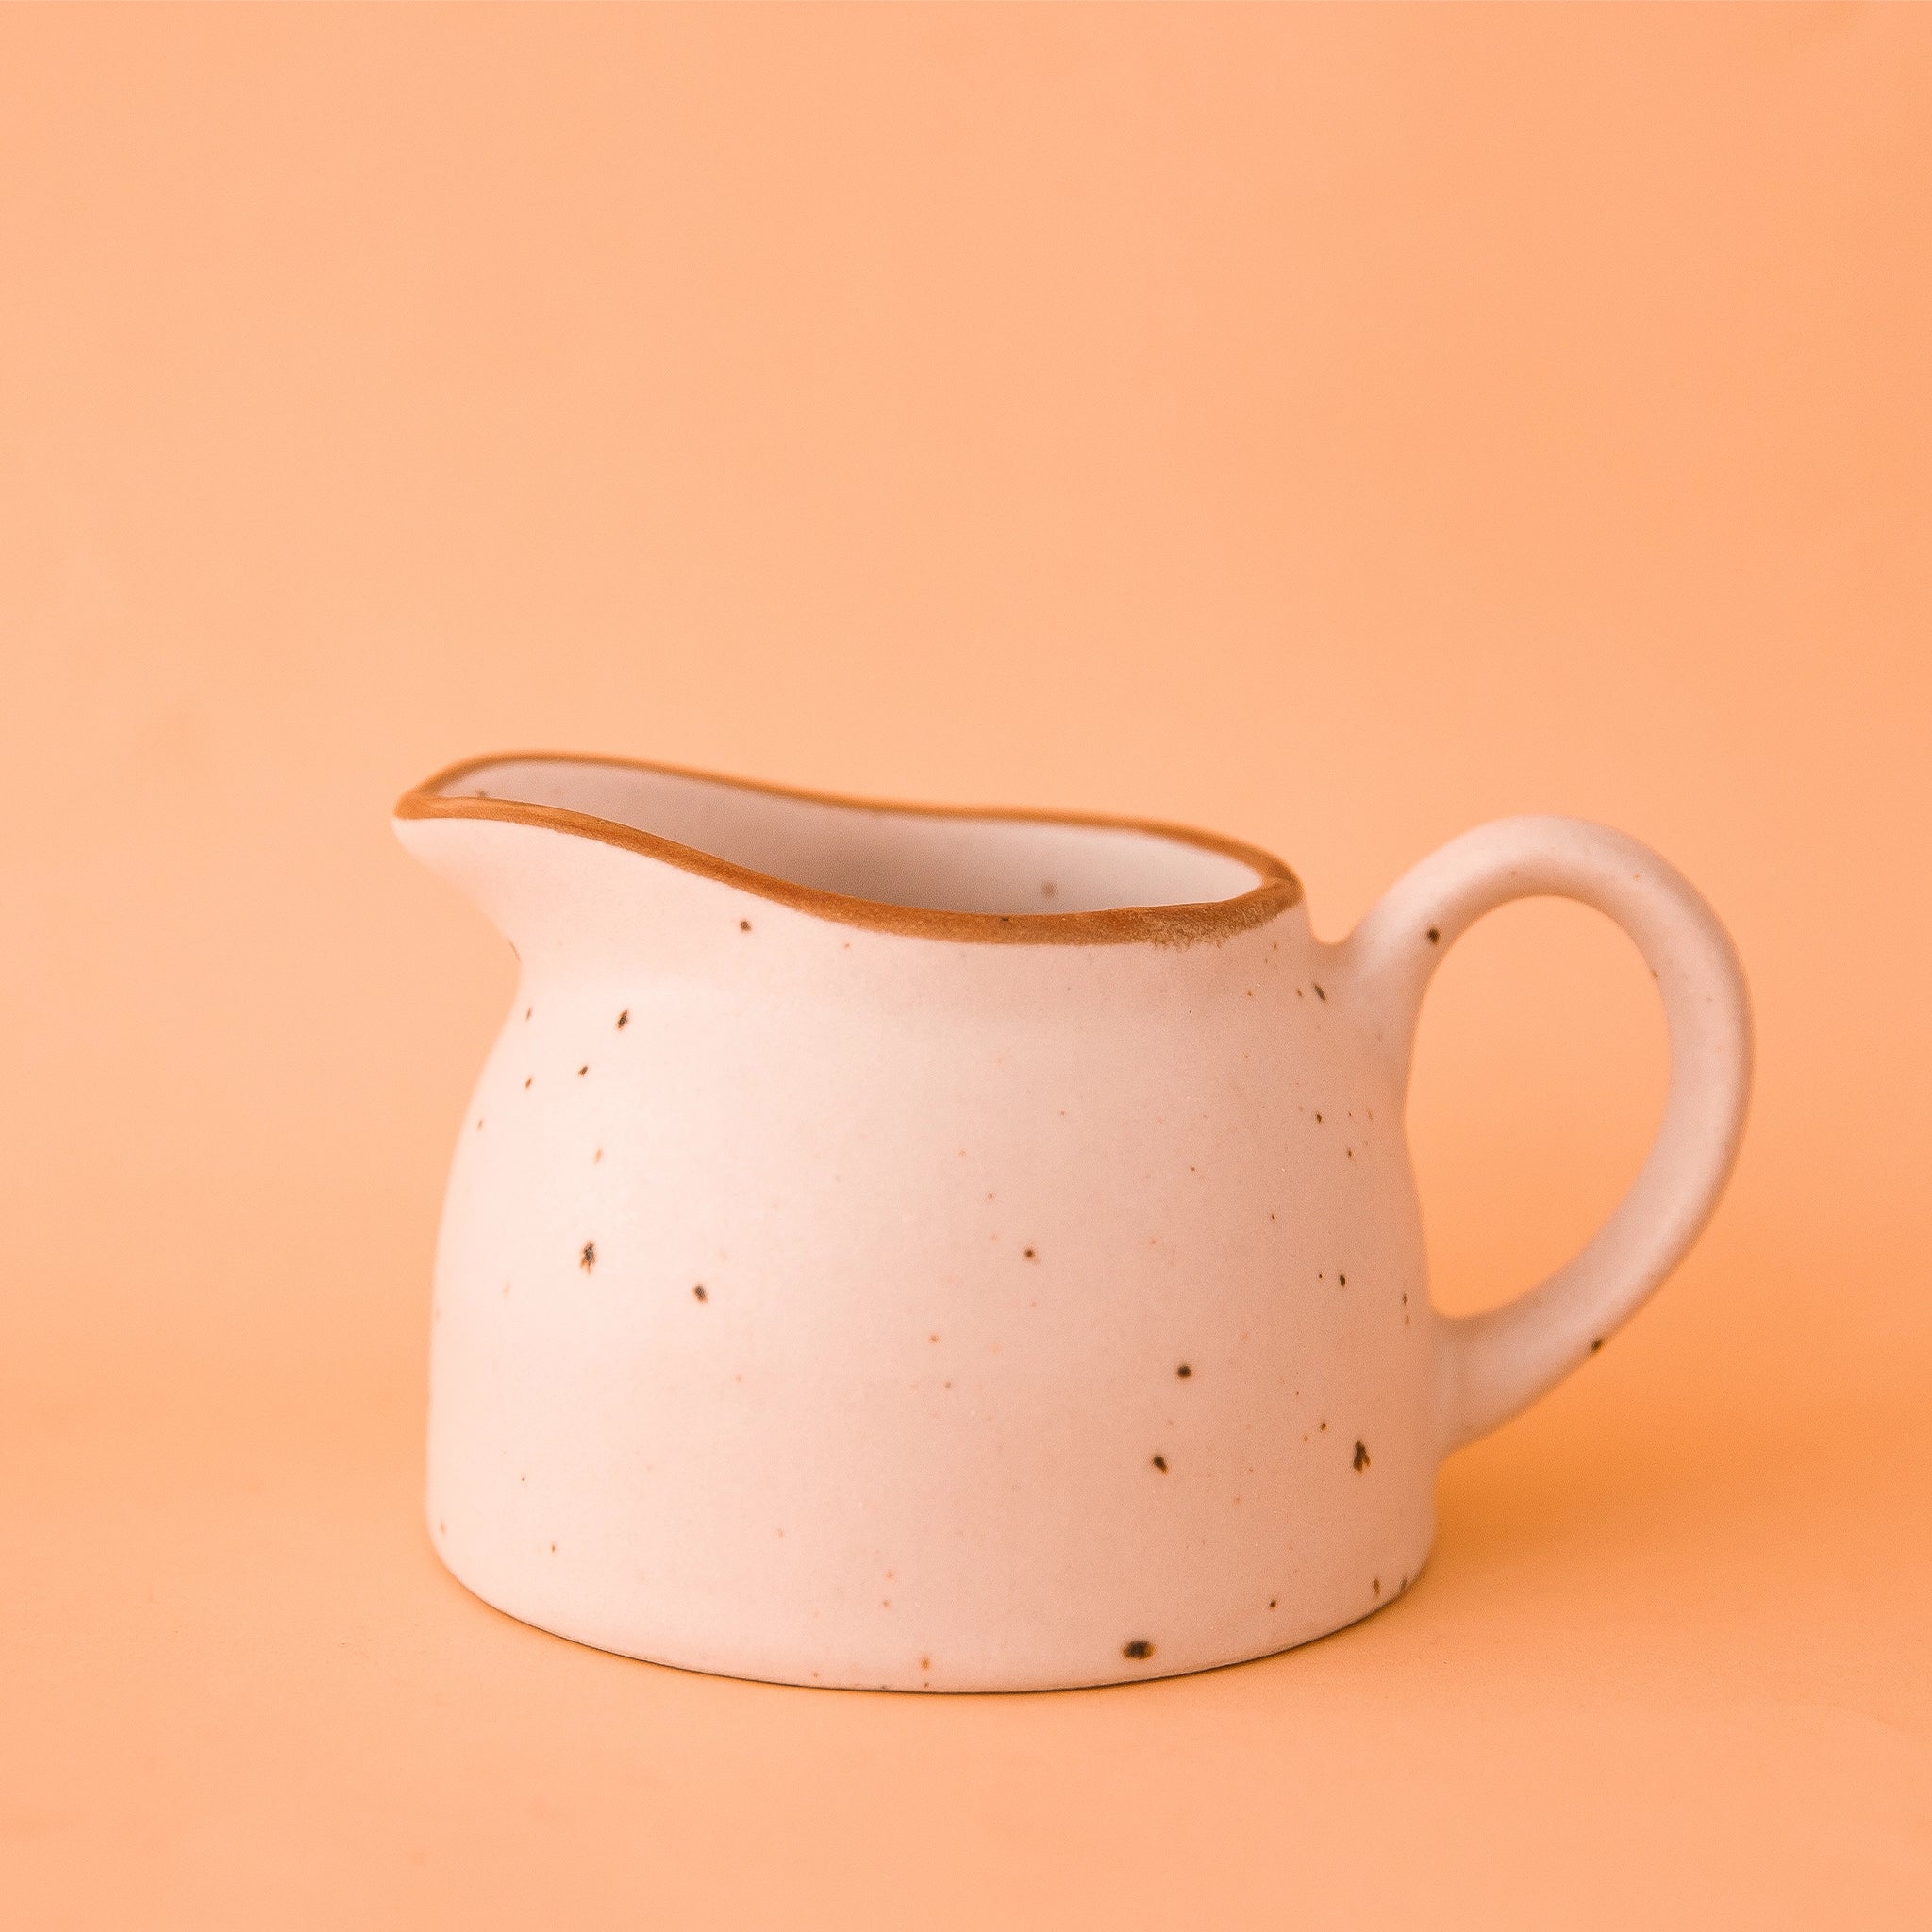 On a peachy background is a cream colored stoneware carafe with a tan rim around the edge.